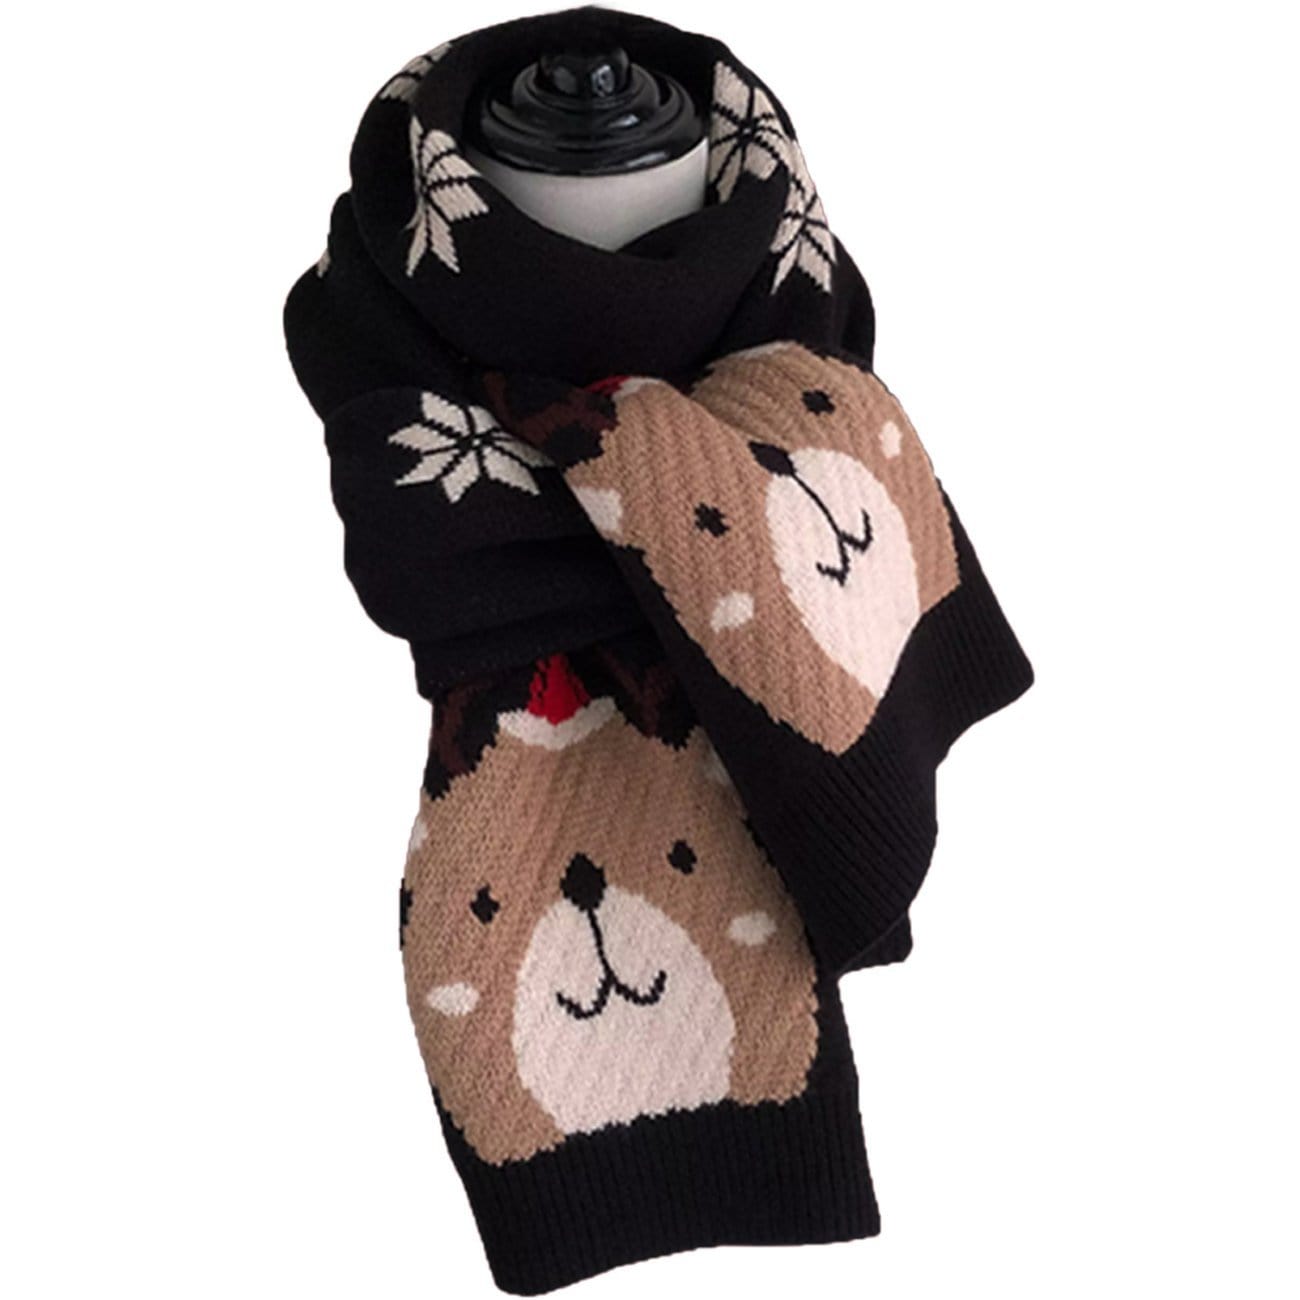 Fawn Snowflake Christmas Knit Scarf Streetwear Brand Techwear Combat Tactical YUGEN THEORY